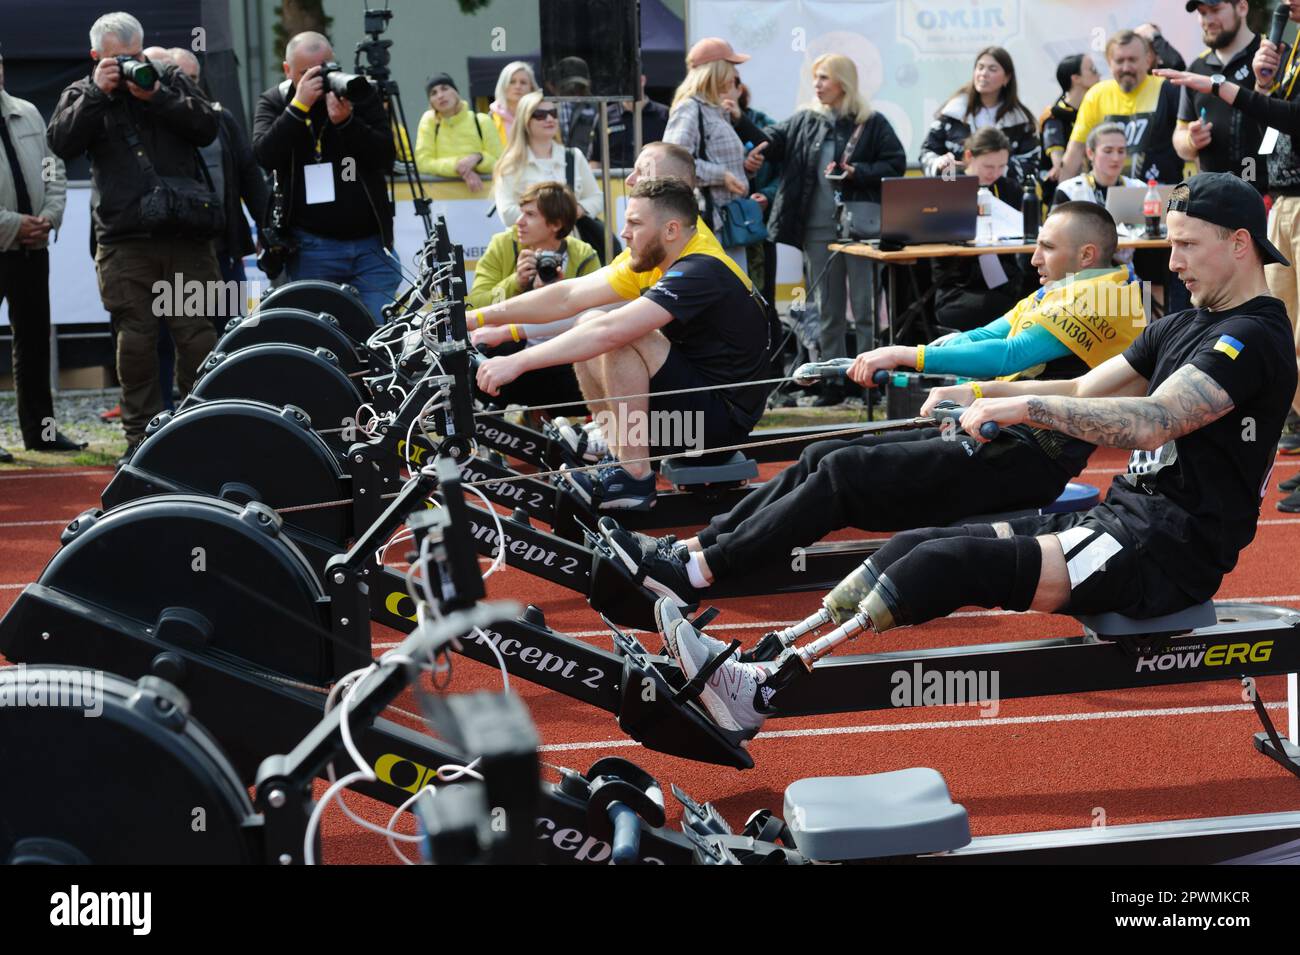 Ukrainian athletes compete at the Outdoor Rowing competition during qualifying competitions of the Invictus Games in Lviv, Ukraine. This is the biggest veteran competition. This year they held in 9 sports. Based on the results of this selection, the national team of Ukraine will be formed from 24 participants, who will represent Ukraine at the Invictus Games international competition, in September in Dusseldorf, Germany. Russia launched a large-scale invasion of Ukraine on February 24, 2022, triggering the largest military attack in Europe since World War II. Stock Photo